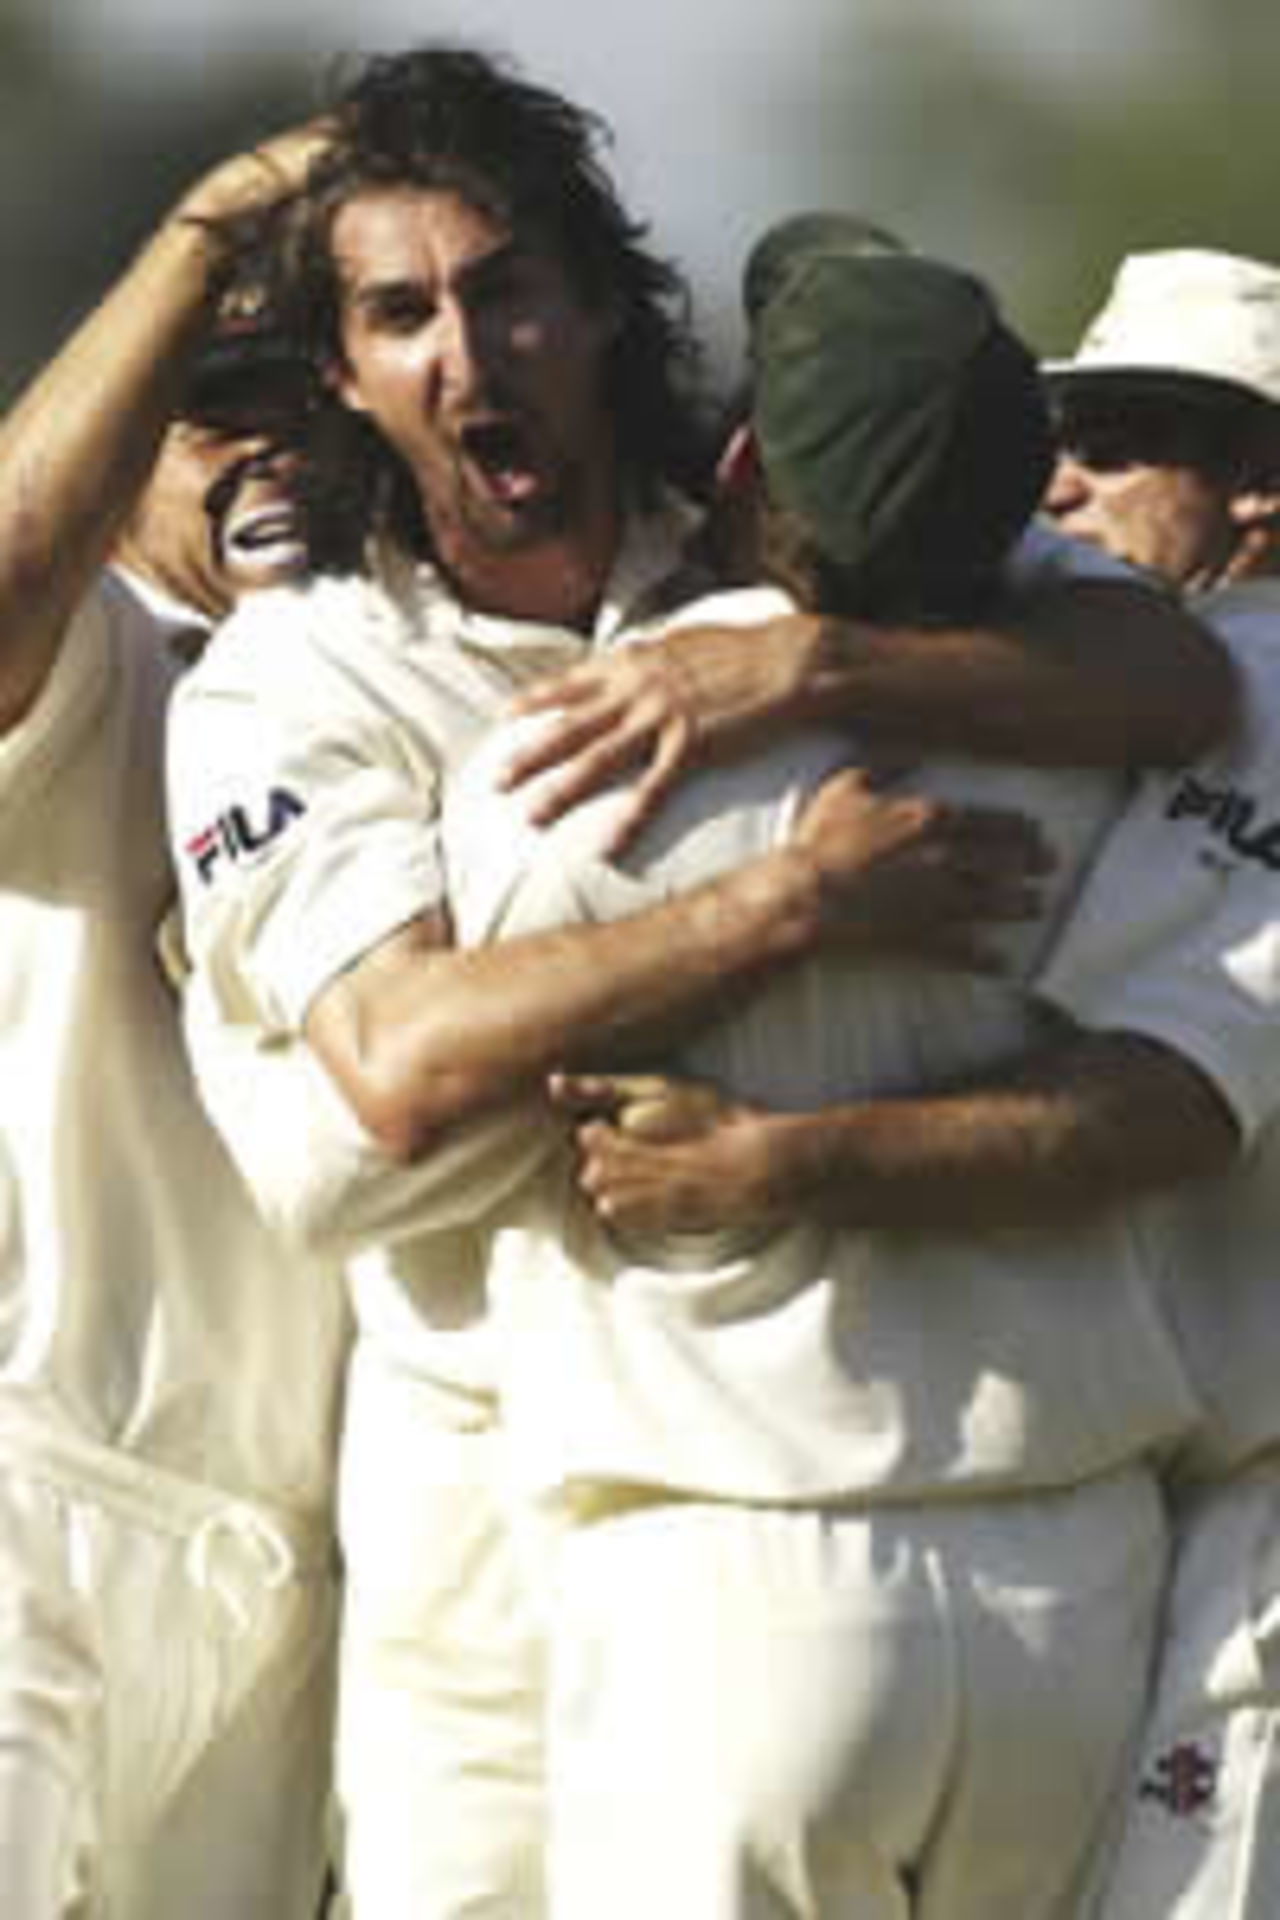 Jason Gillespie claimed the big wickets of Jayasuriya, Atapattu and Jayawardene to give Australia hope of claiming victory in the 2nd Test in Kandy